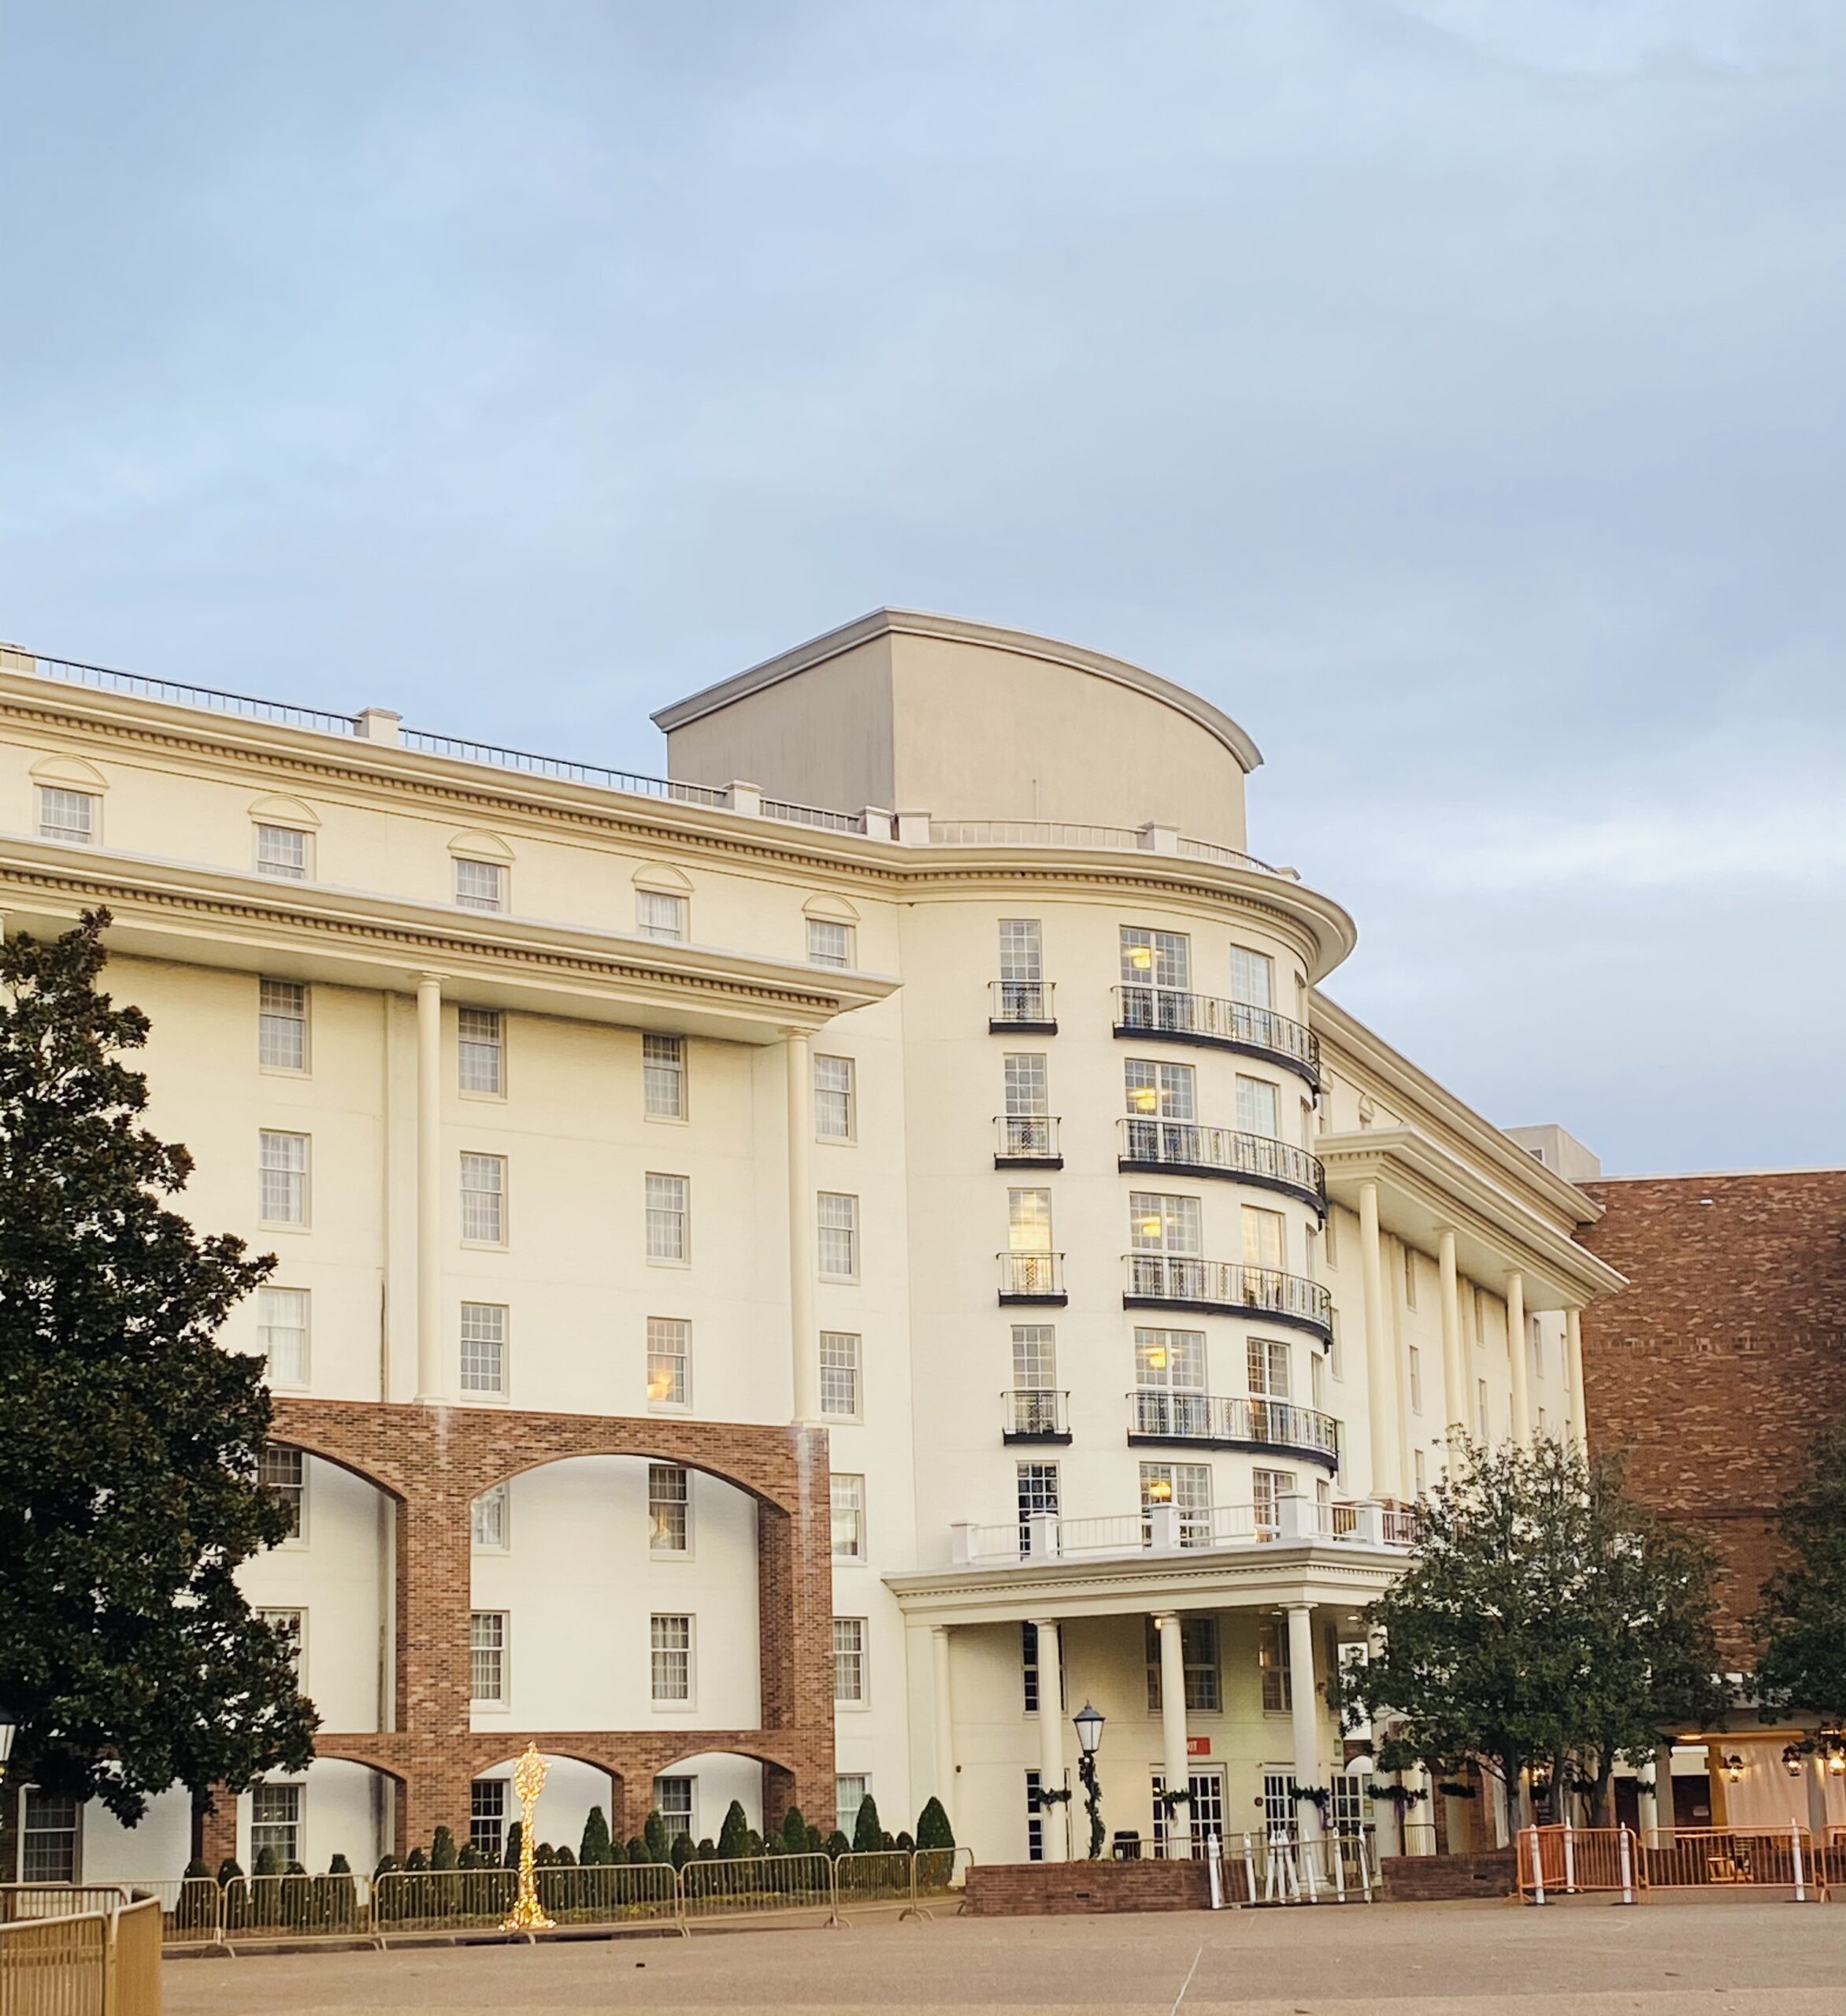 One of the best hotels in Nashville for Families: Gaylord Opryland Resort